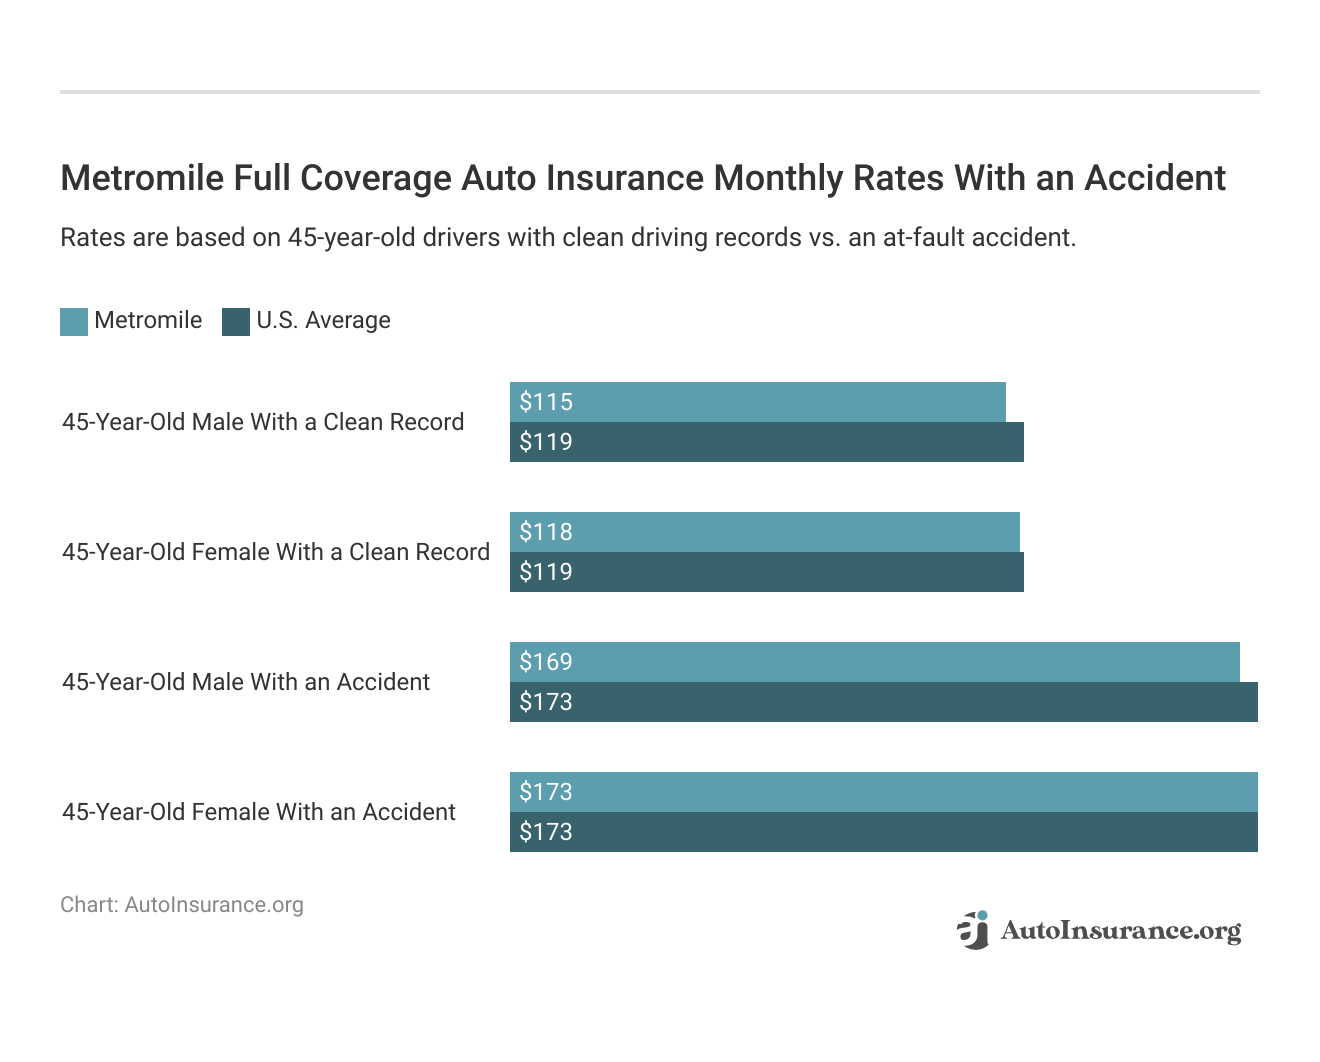 <h3>Metromile Full Coverage Auto Insurance Monthly Rates With an Accident</h3>